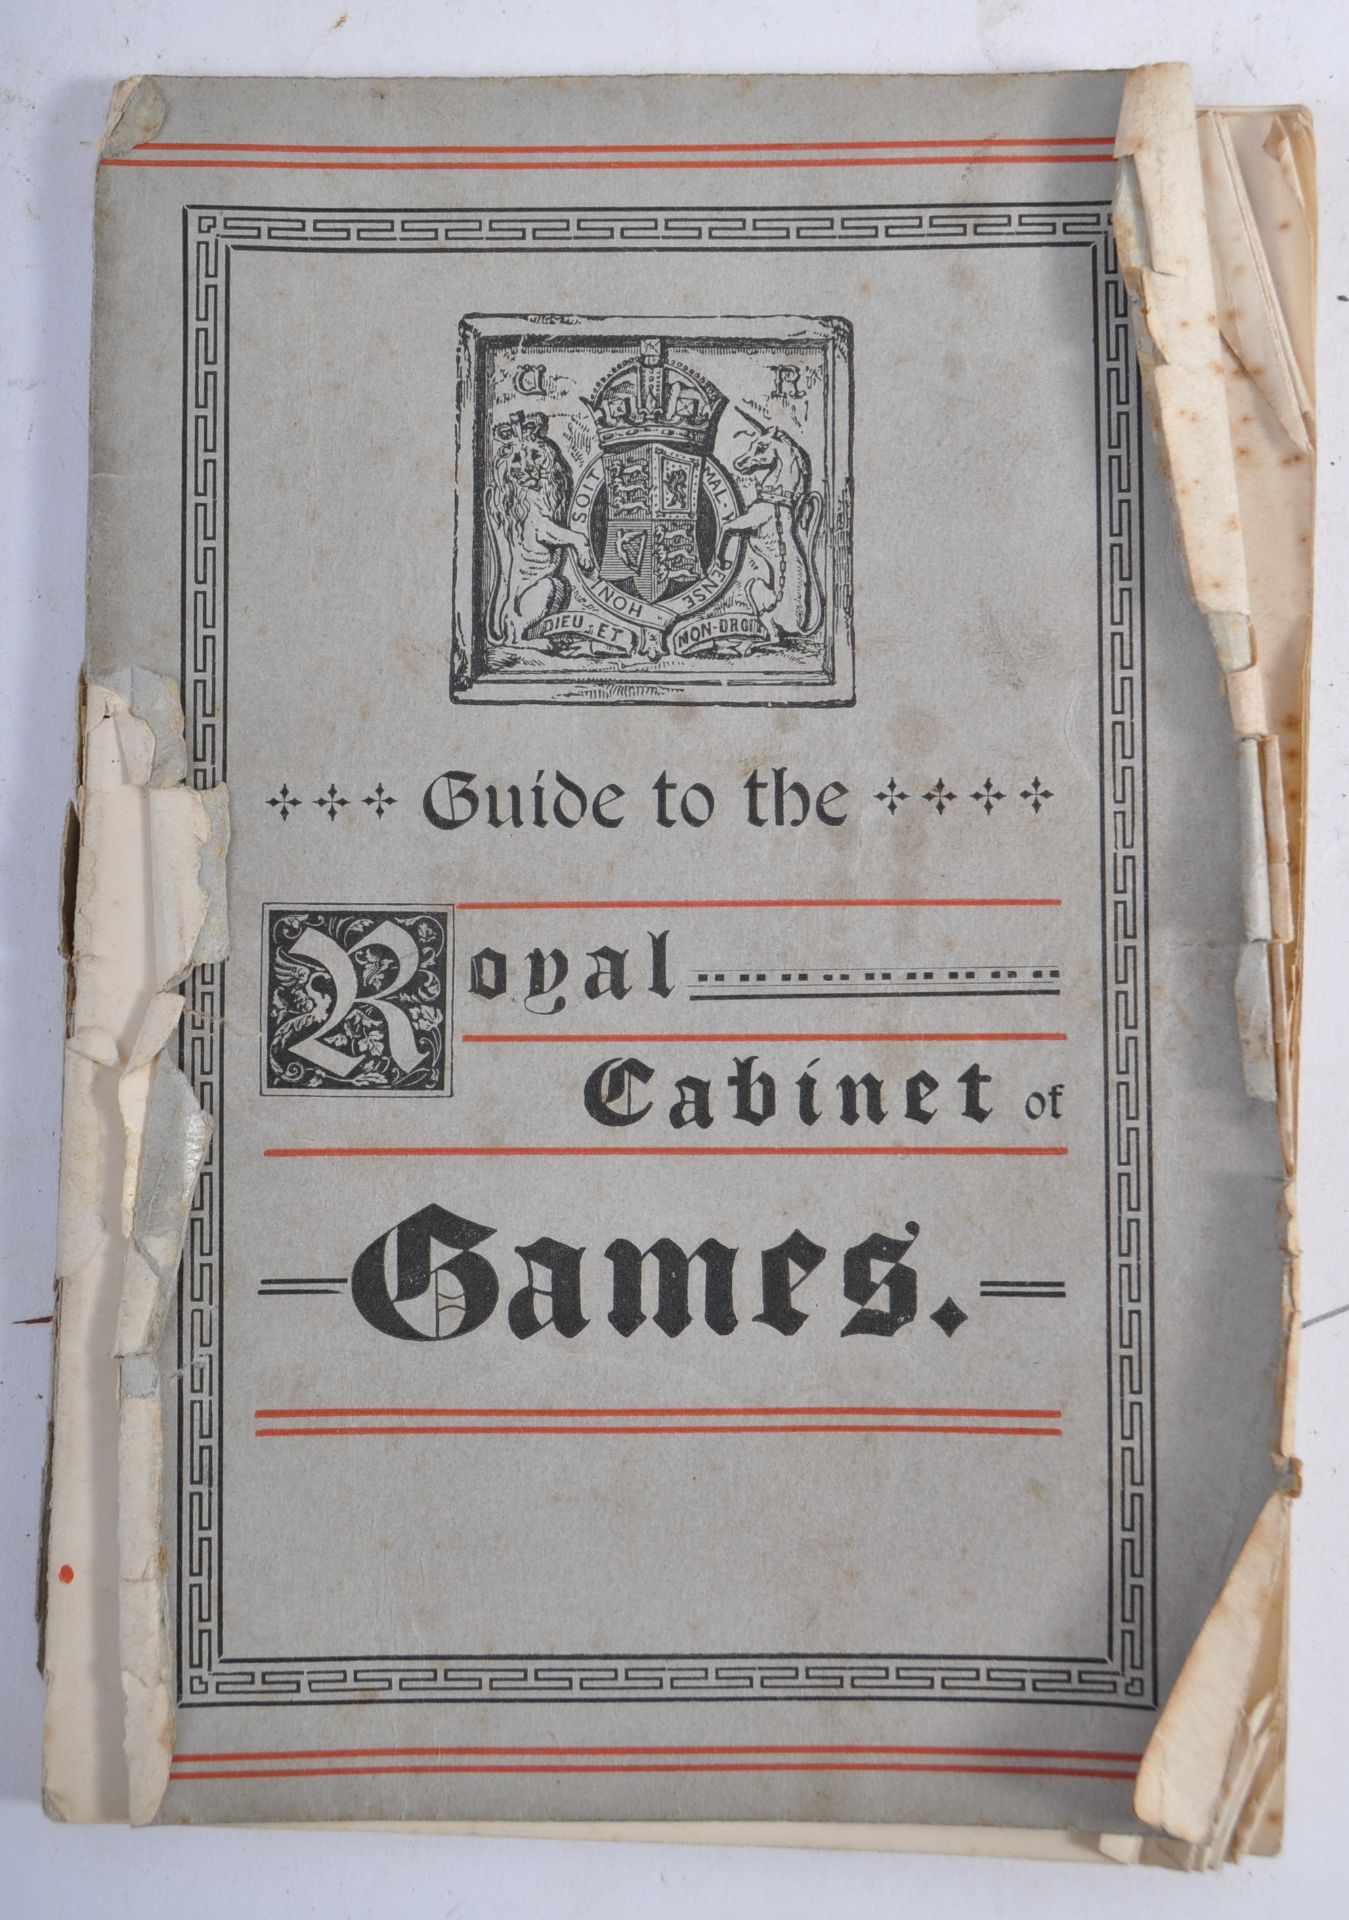 RARE 19TH CENTURY THE ROYAL CABINET OF GAMES COMPENDIUM BOX - Image 5 of 11